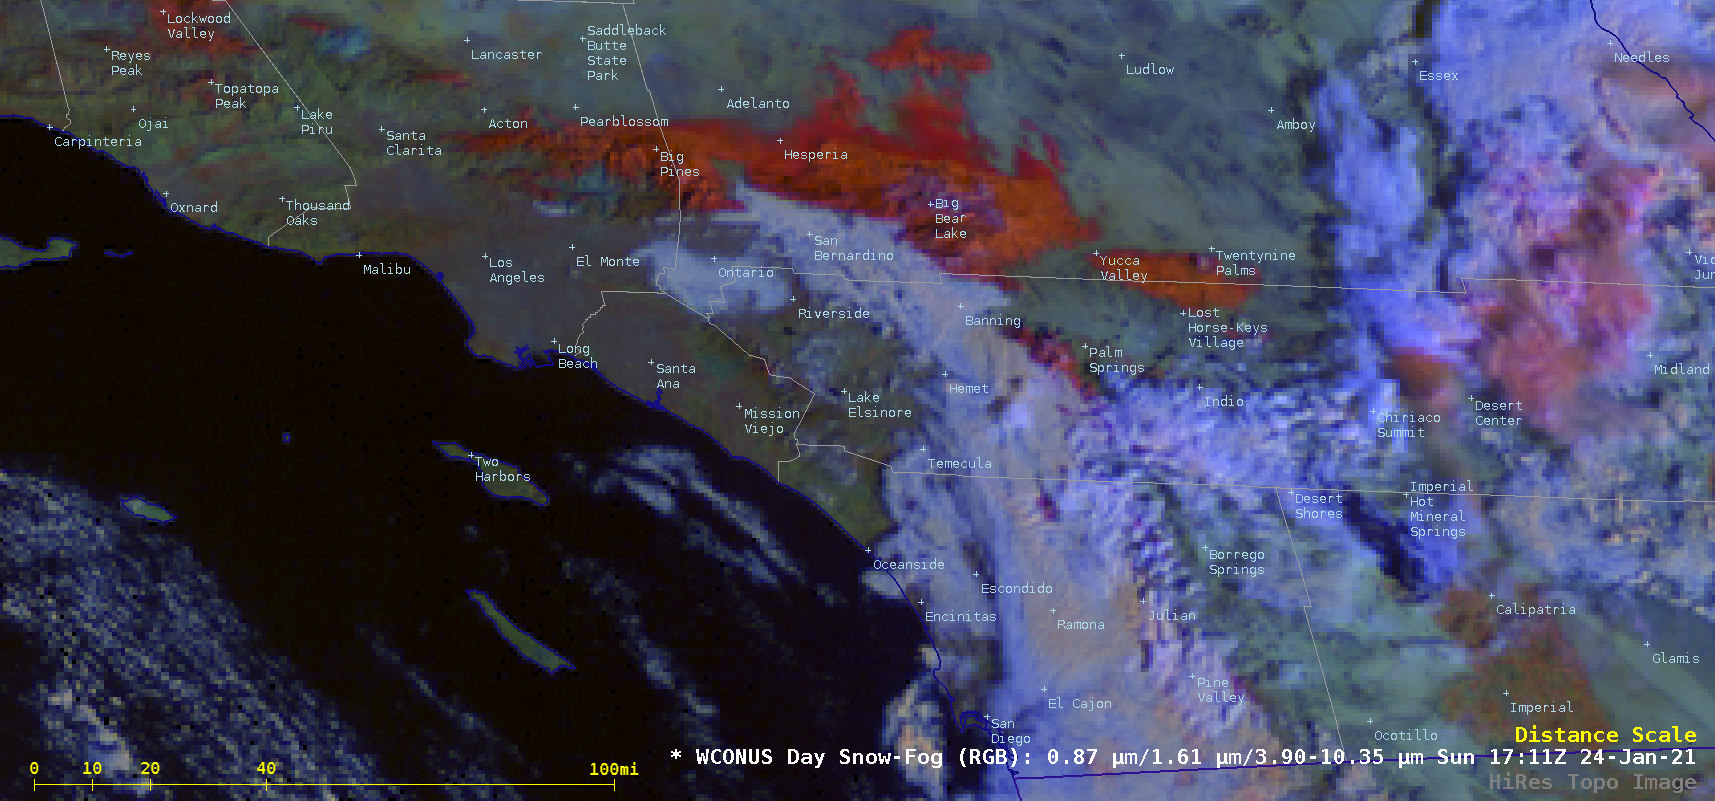 GOES-17 Day Snow-Fog RGB images [click t play animation | MP4]